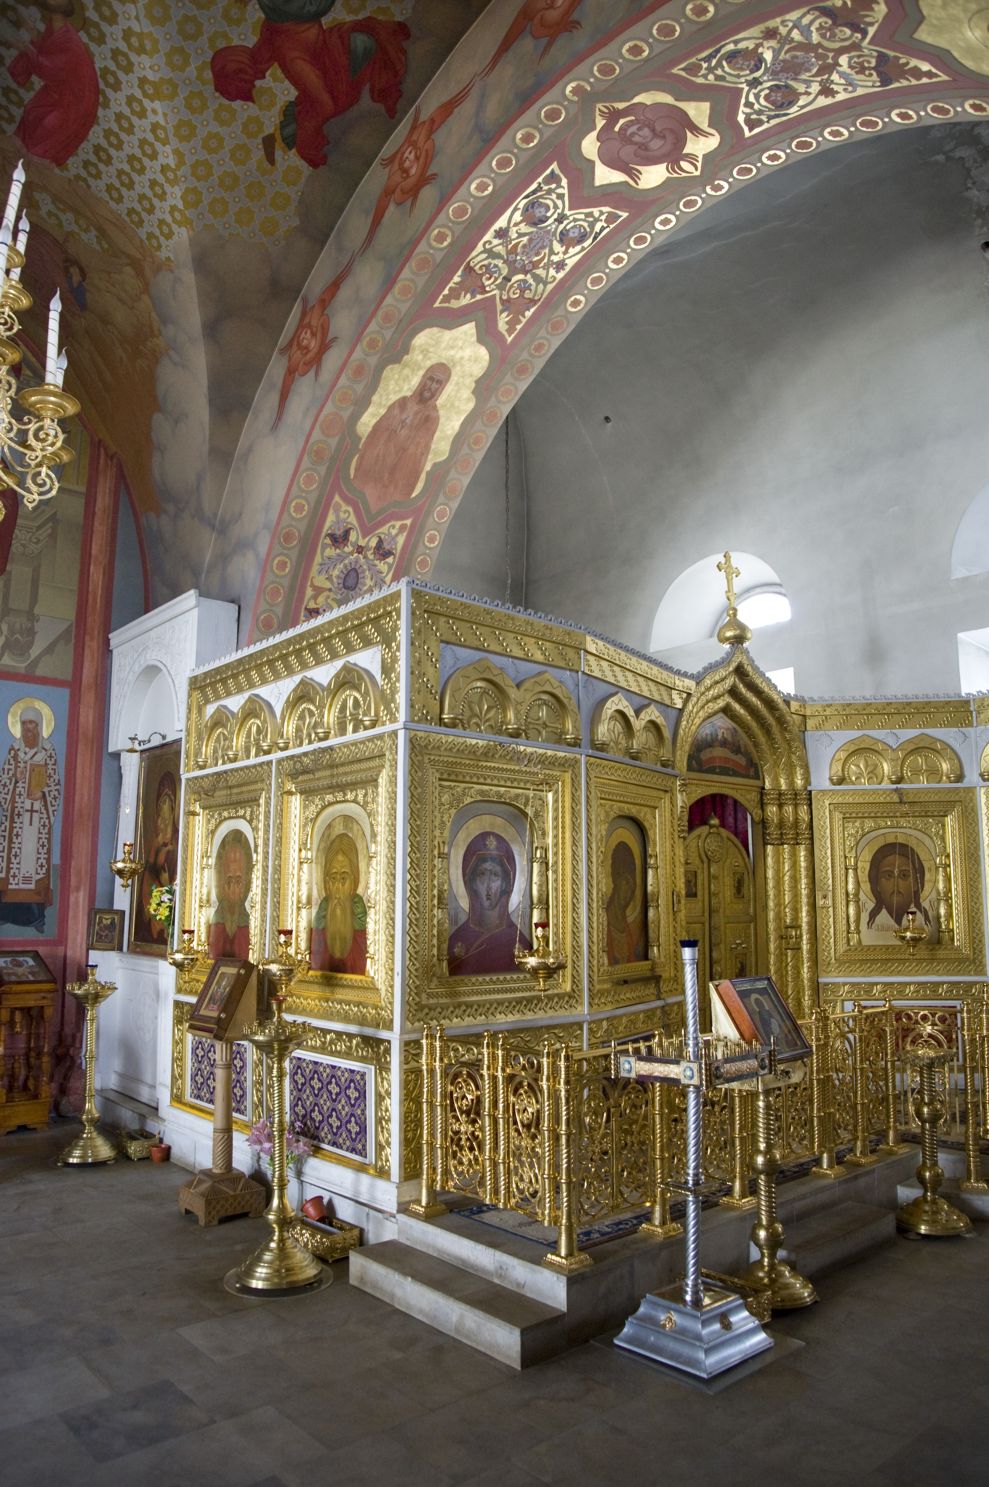 Roshcha
Russia. Kaluga Region. Borovsk District
St. Pafnutii Borovsk Monastery
Cathedral of Nativity of Mother of God
Interior. South altar
2010-07-17
© Photographs by William Brumfield